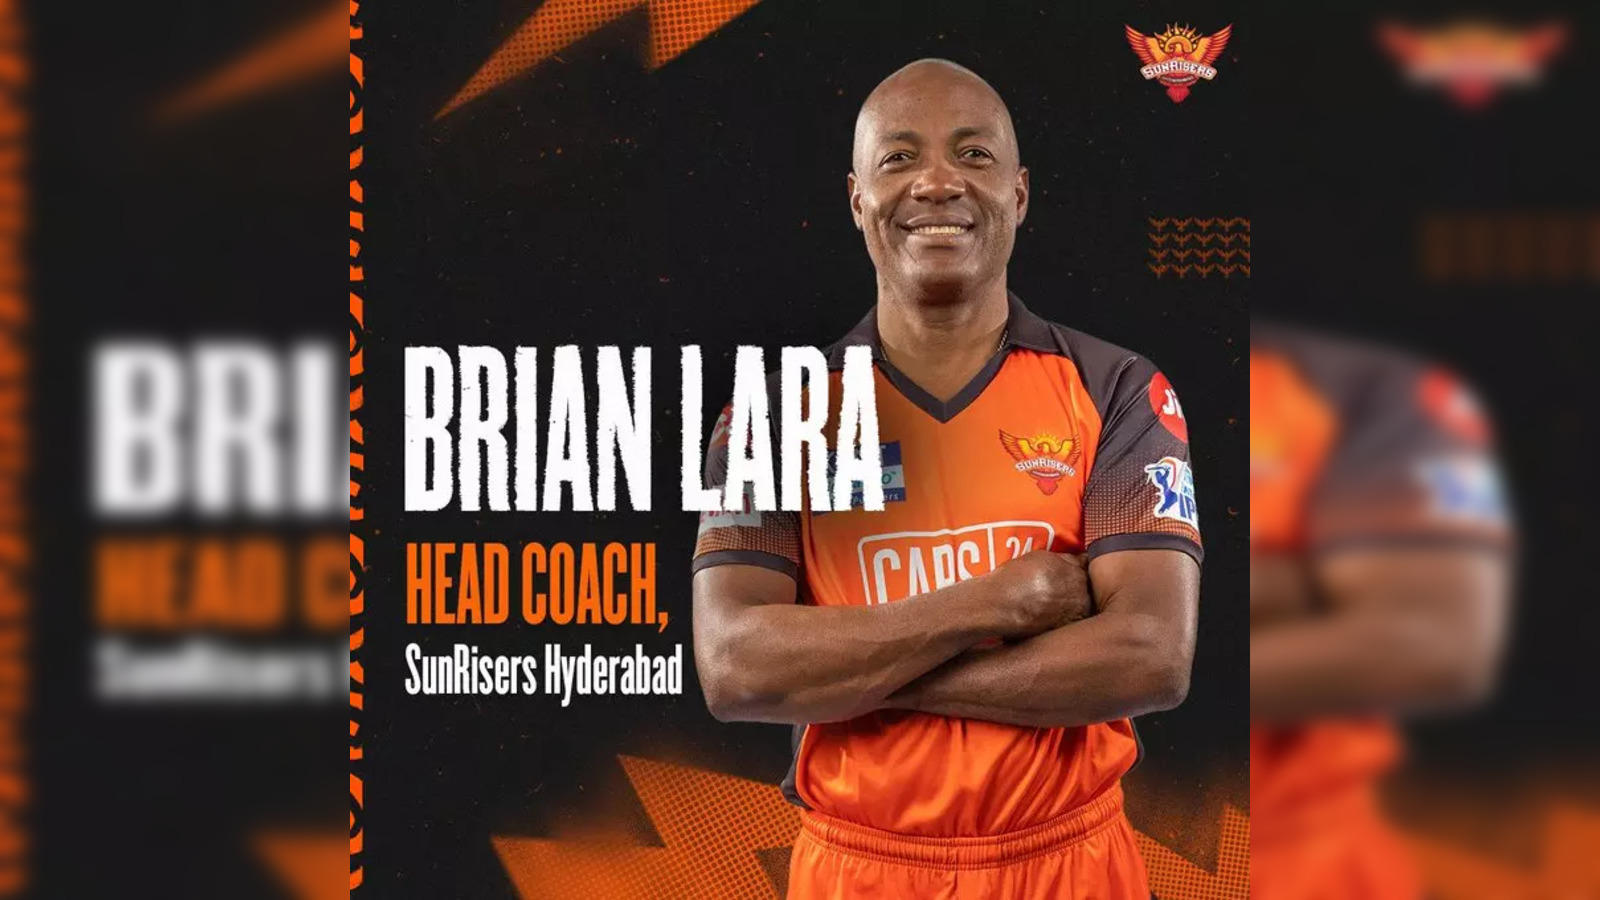 Bachpan becomes the Official School Education Partner for SunRisers  Hyderabad